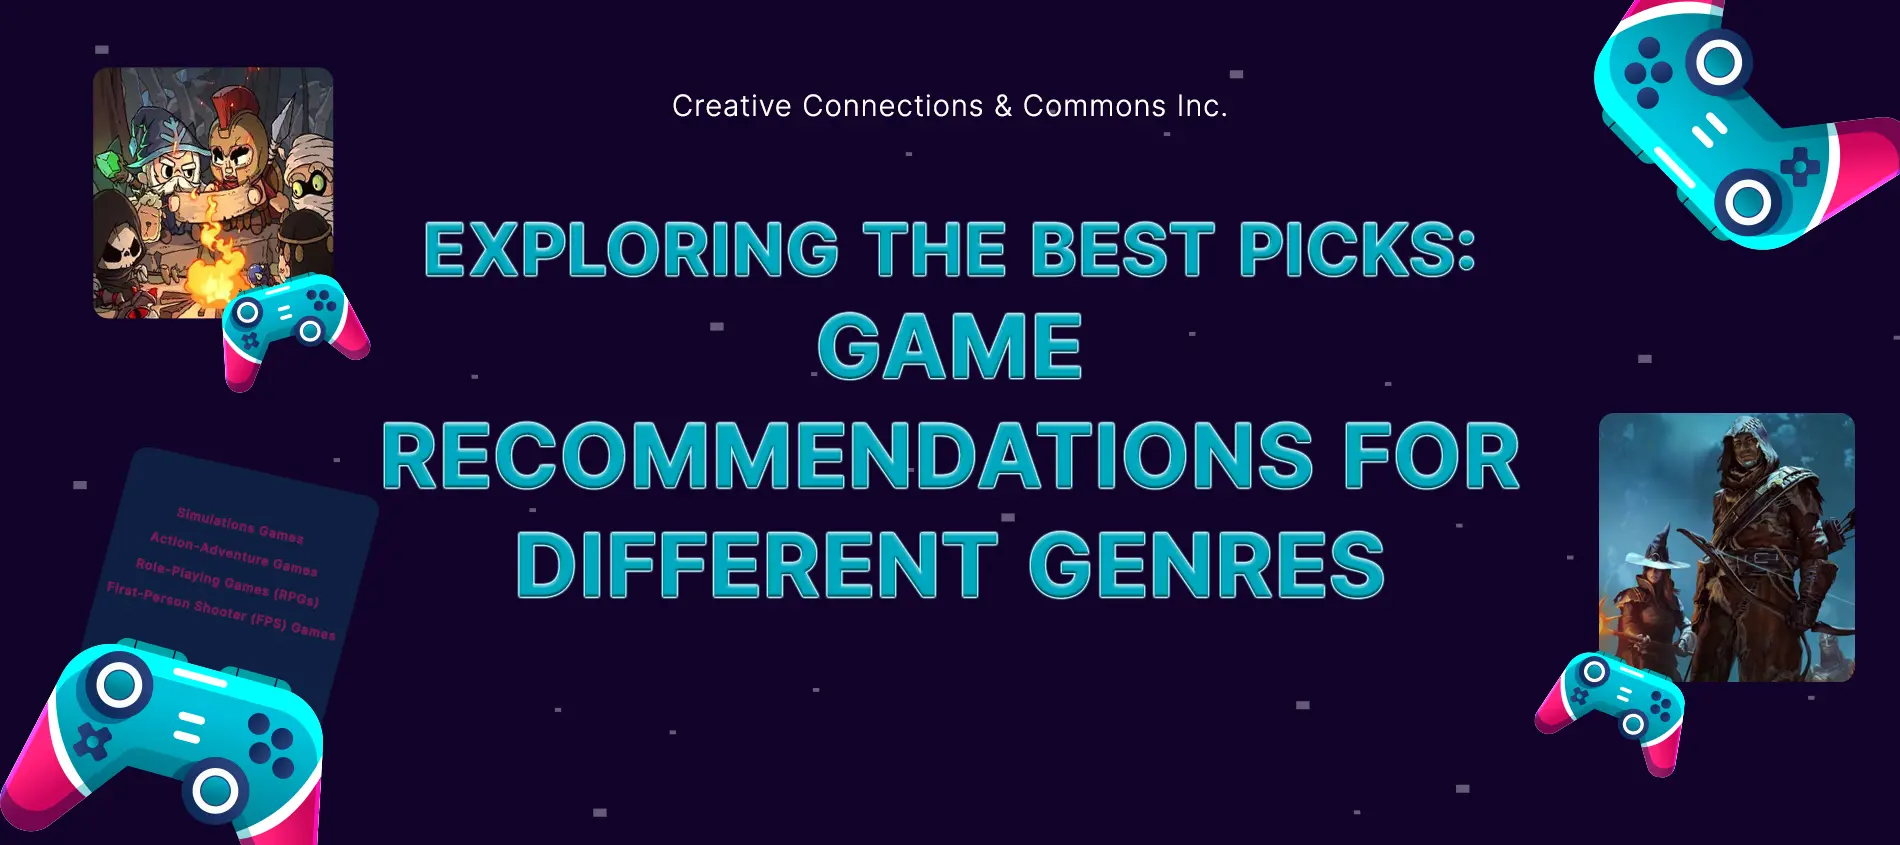 Exploring the Best Picks Game Recommendations for Different Genres